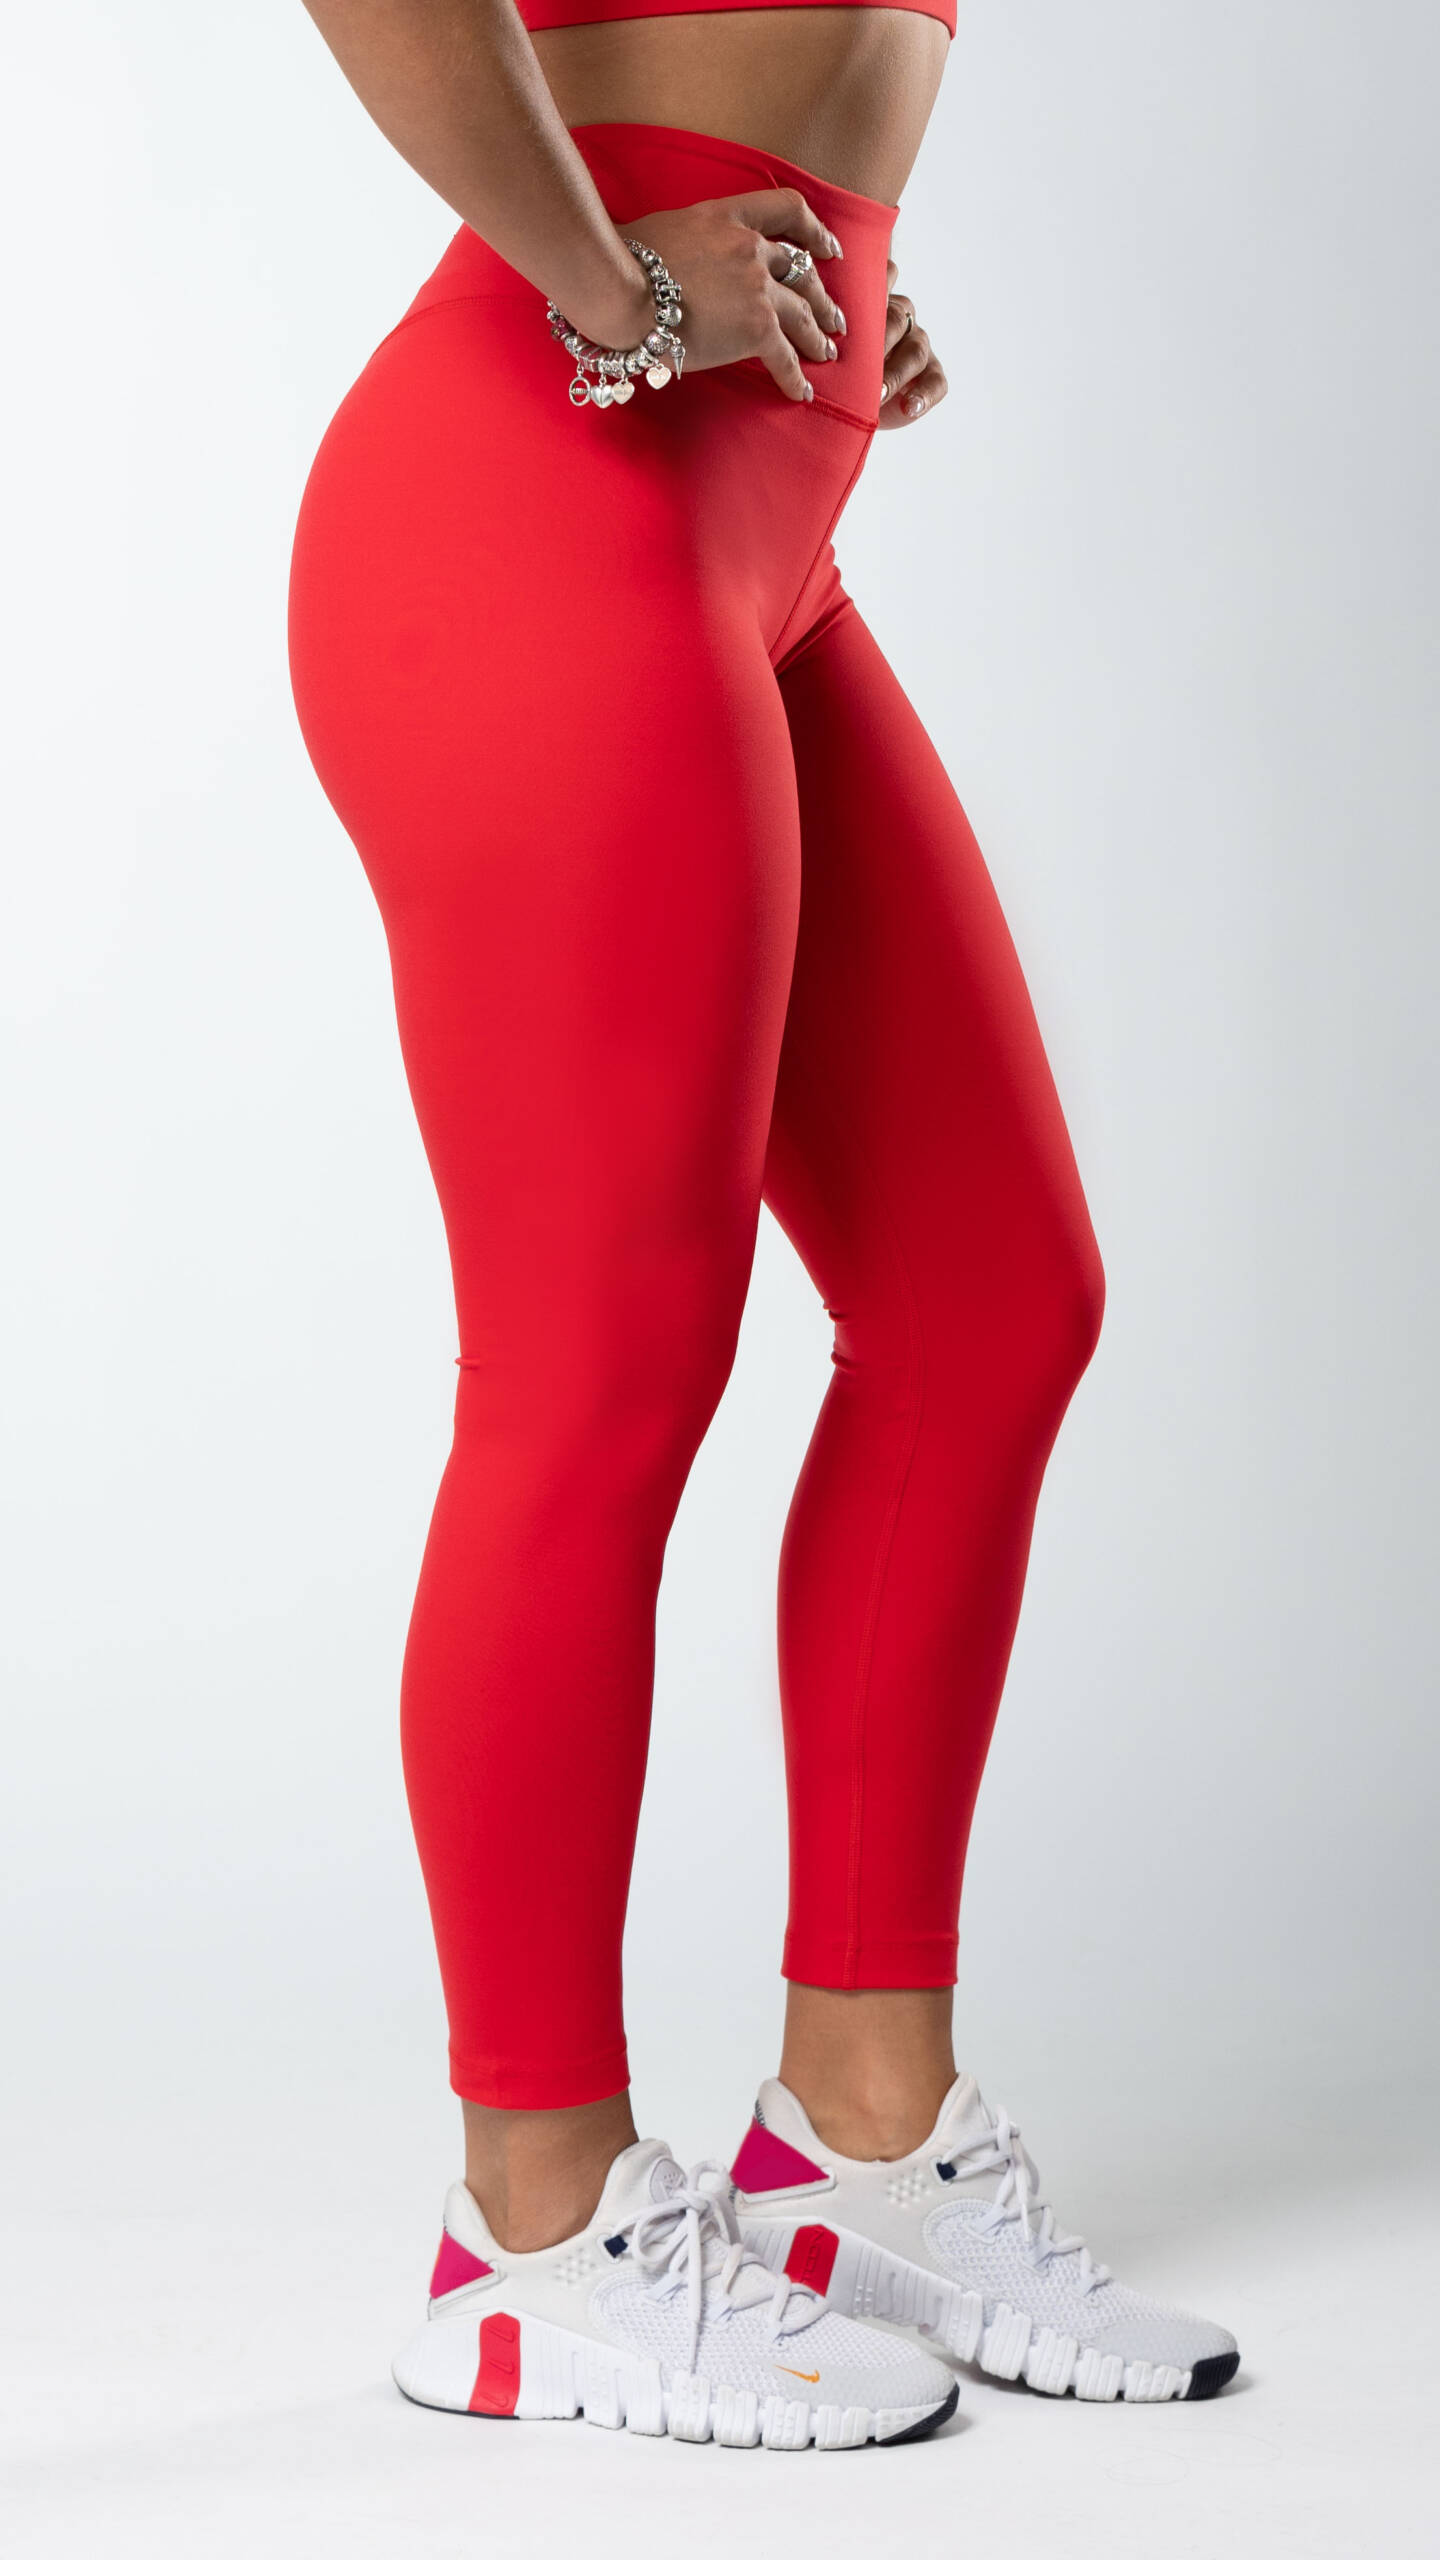 Adidas Training Wow Climalite Leggings In Red (Posts by Génesis Castro)